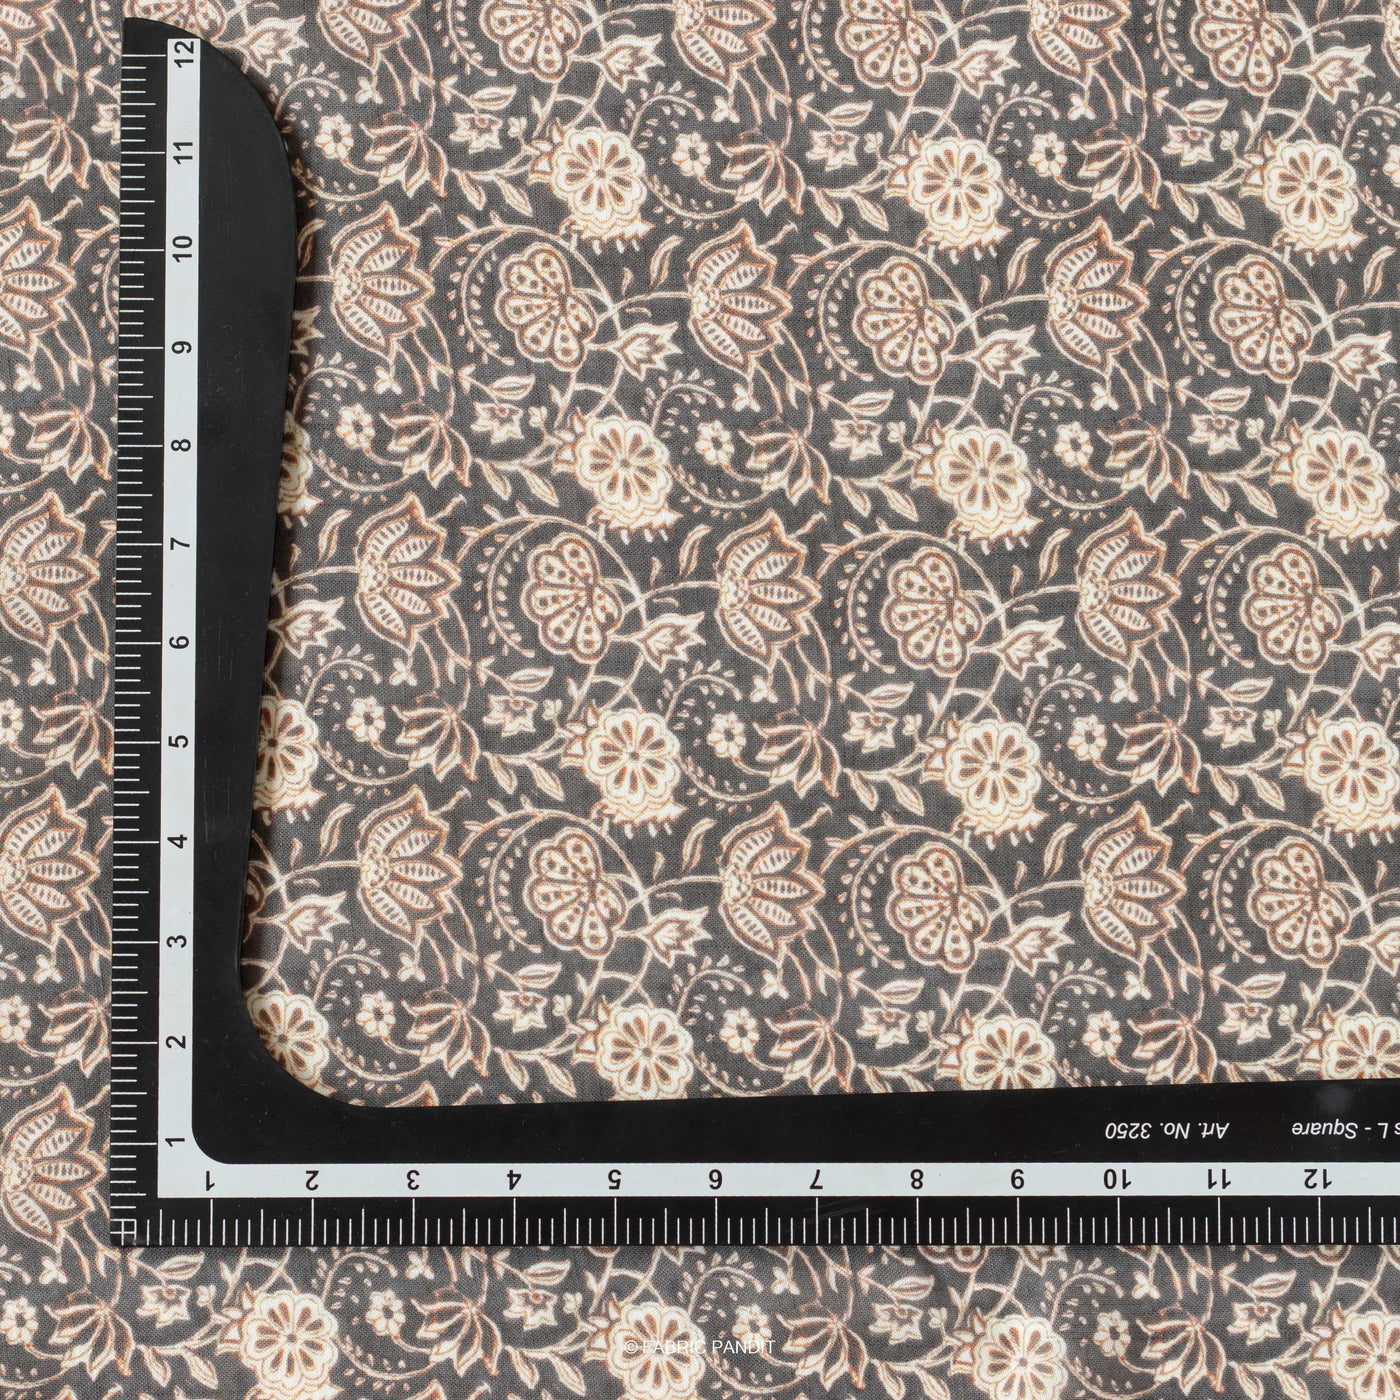 Fabric Pandit Cut Piece (CUT PIECE) Coffee Brown And Beige Continuous Floral Pattern Digital Printed Linen Slub Fabric (Width 44 Inches)